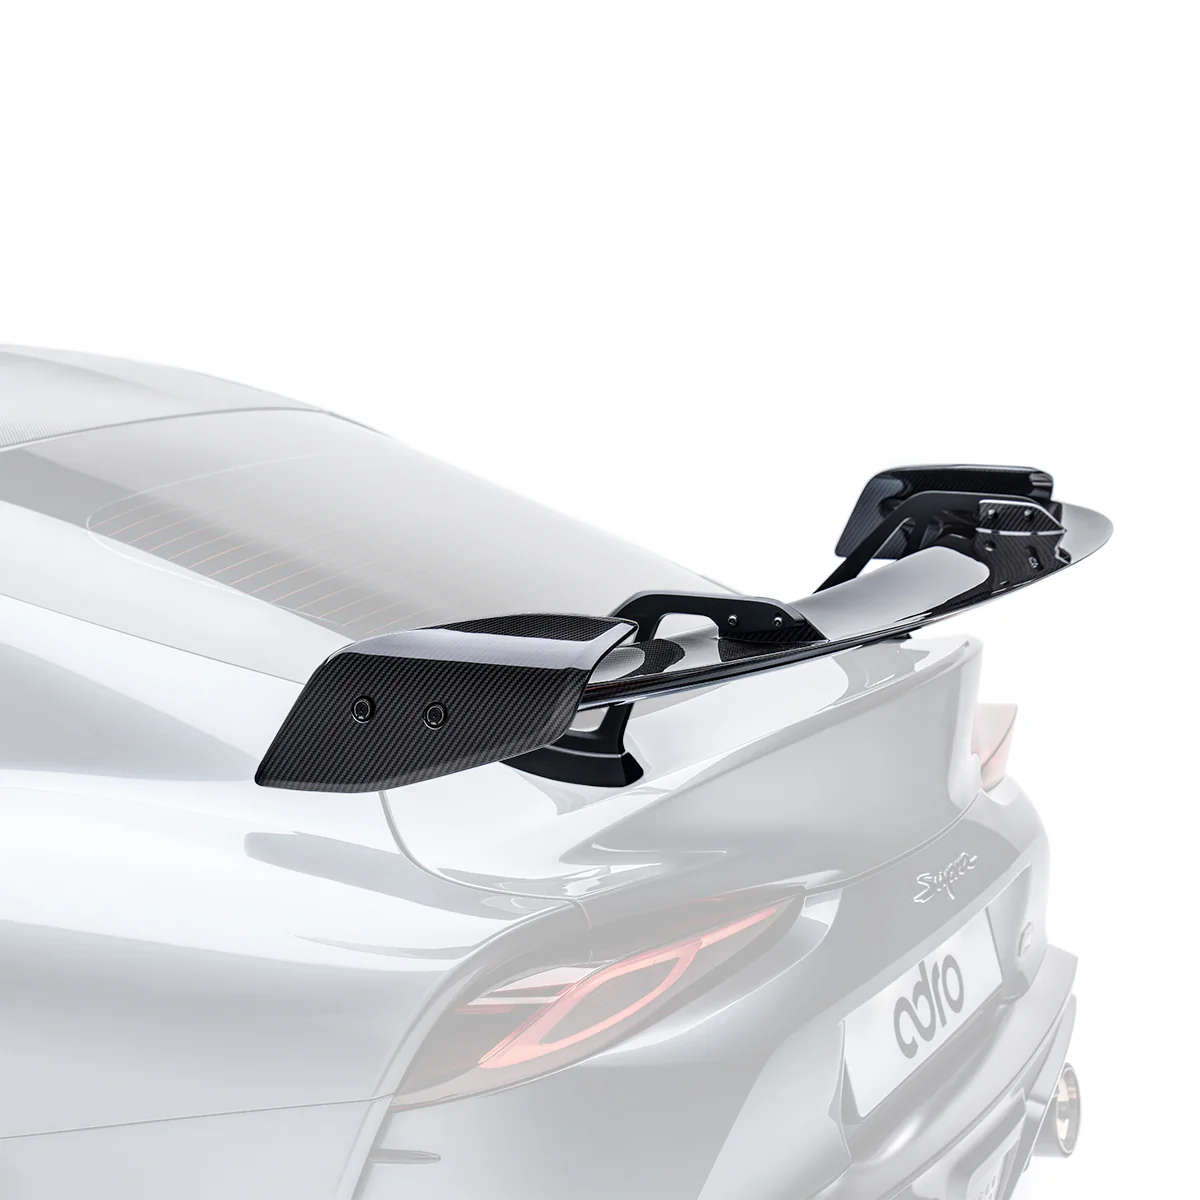 ADRO- TOYOTA SUPRA AT-R2 SWAN NECK WING